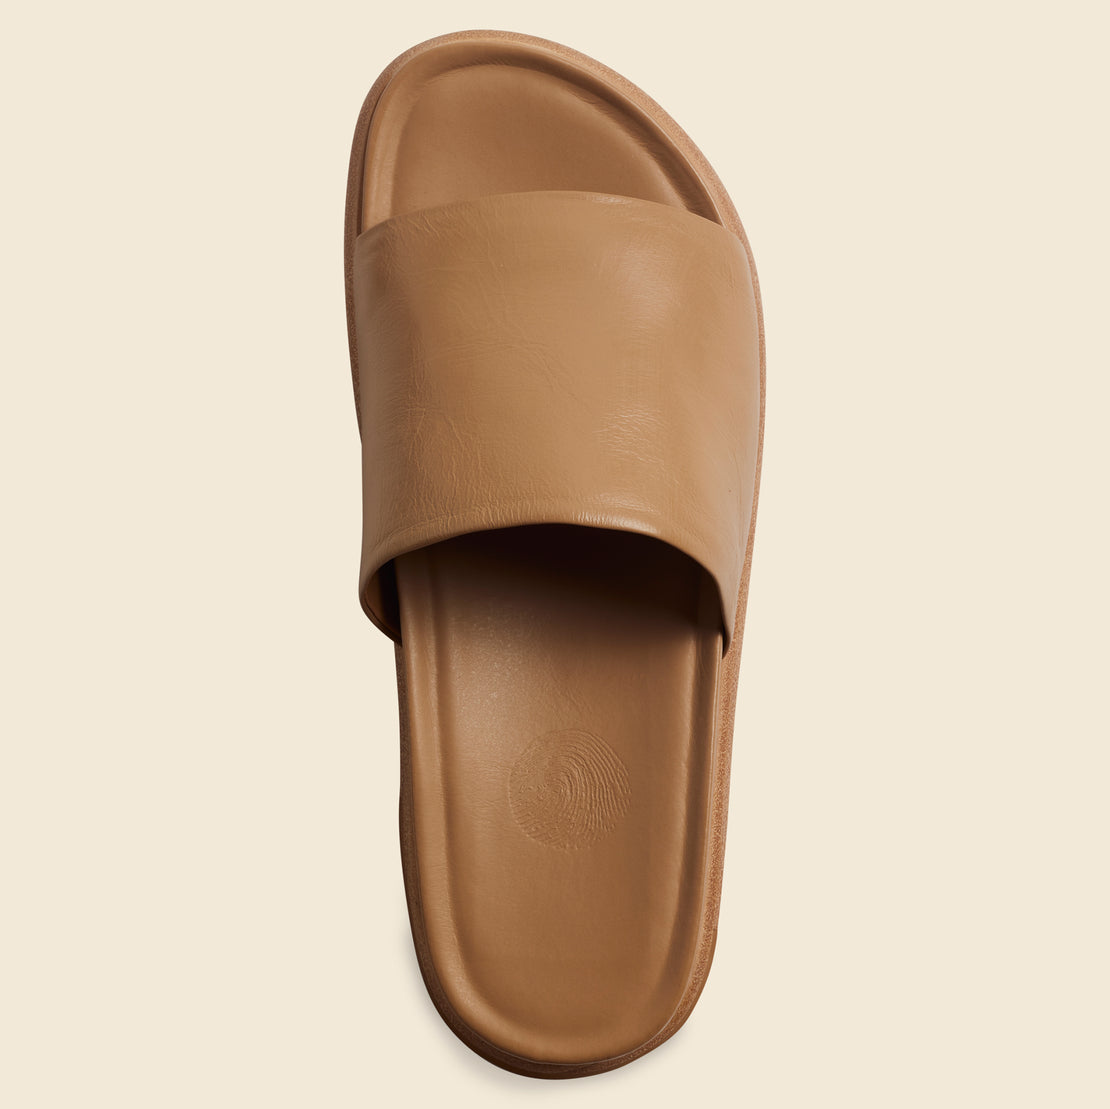 Novma Slide - Nude - Wal & Pai - STAG Provisions - W - Shoes - Sandals